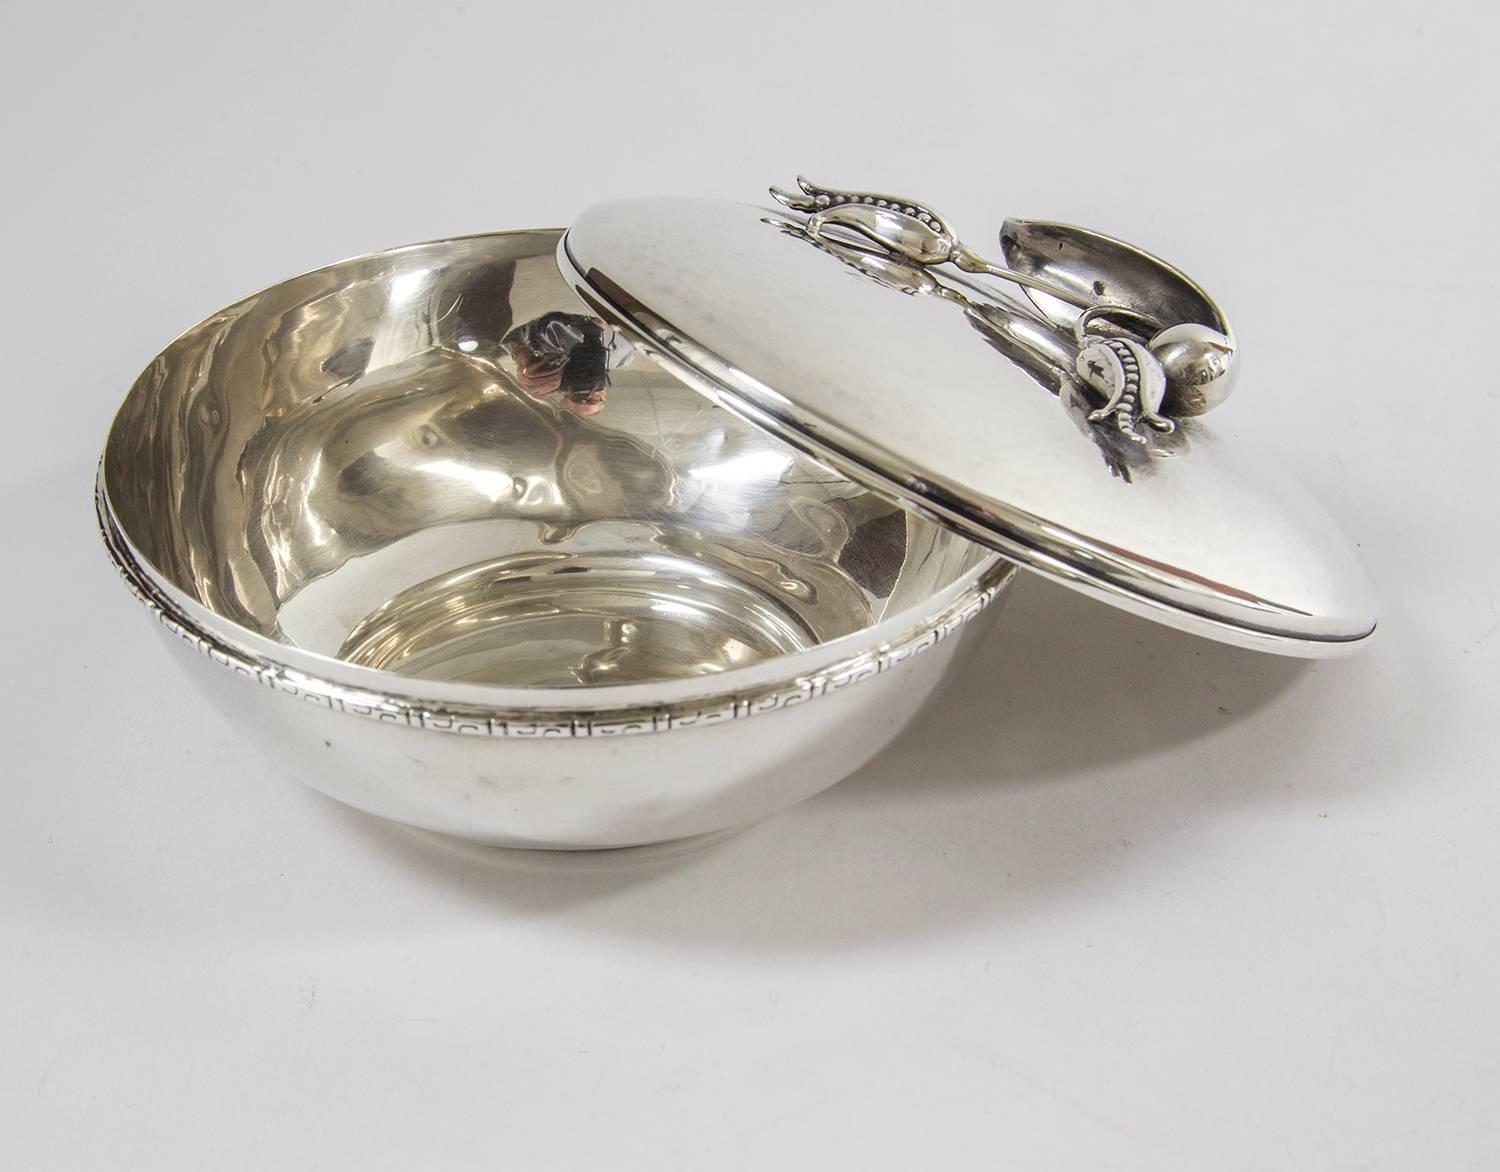 Mid-Century Modern sterling silver covered dish by renowned Canadian Silversmith Carl Poul Petersen, lid adorned with blossom or pea pod like flowers. Hand-hammered; No monograms or engraving; Signed 